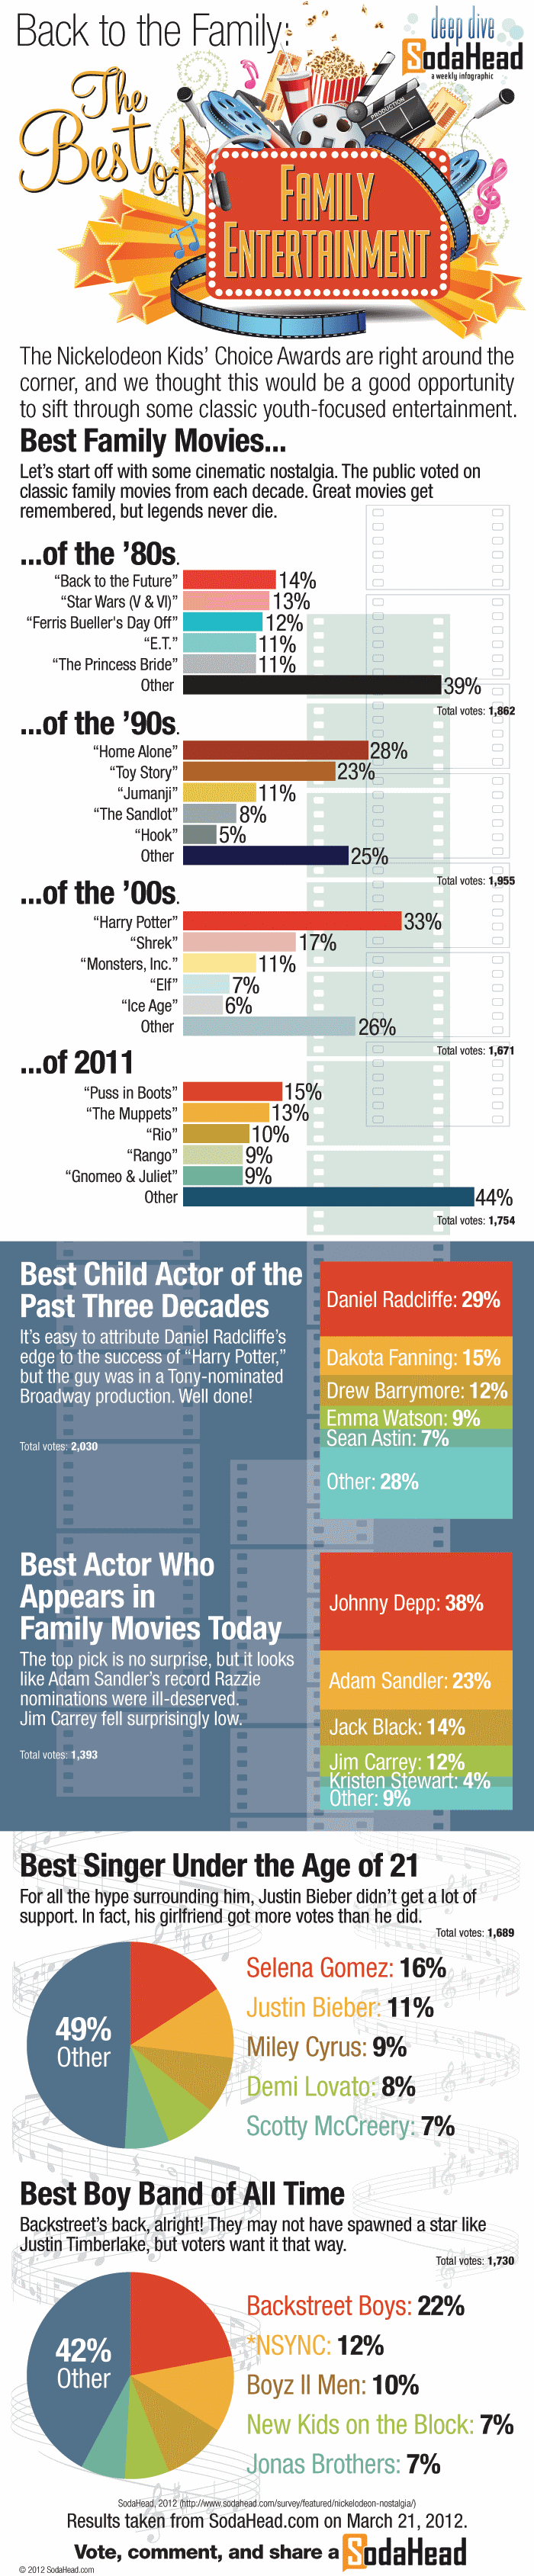 family films infographic